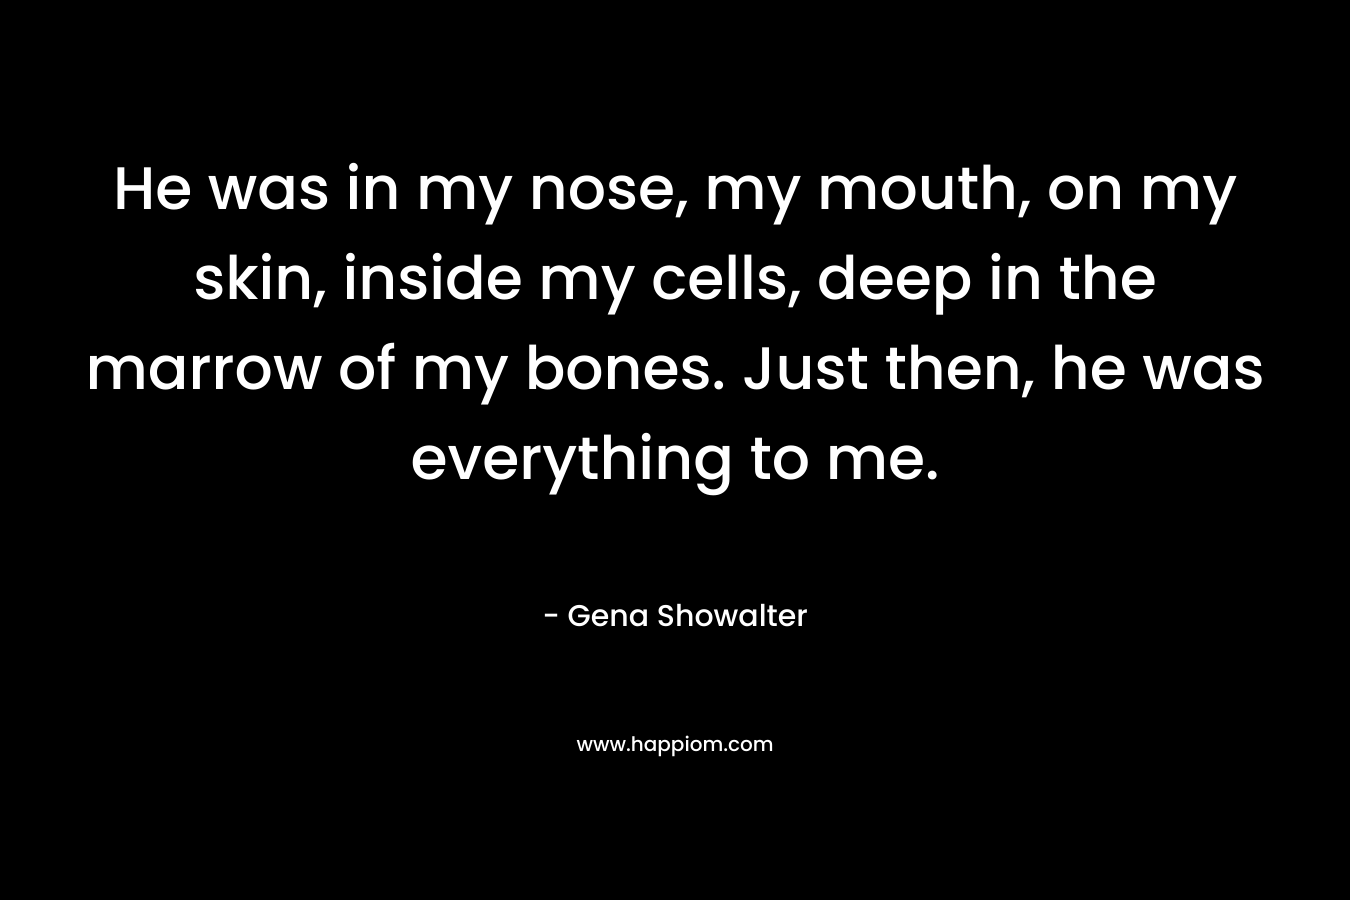 He was in my nose, my mouth, on my skin, inside my cells, deep in the marrow of my bones. Just then, he was everything to me. – Gena Showalter